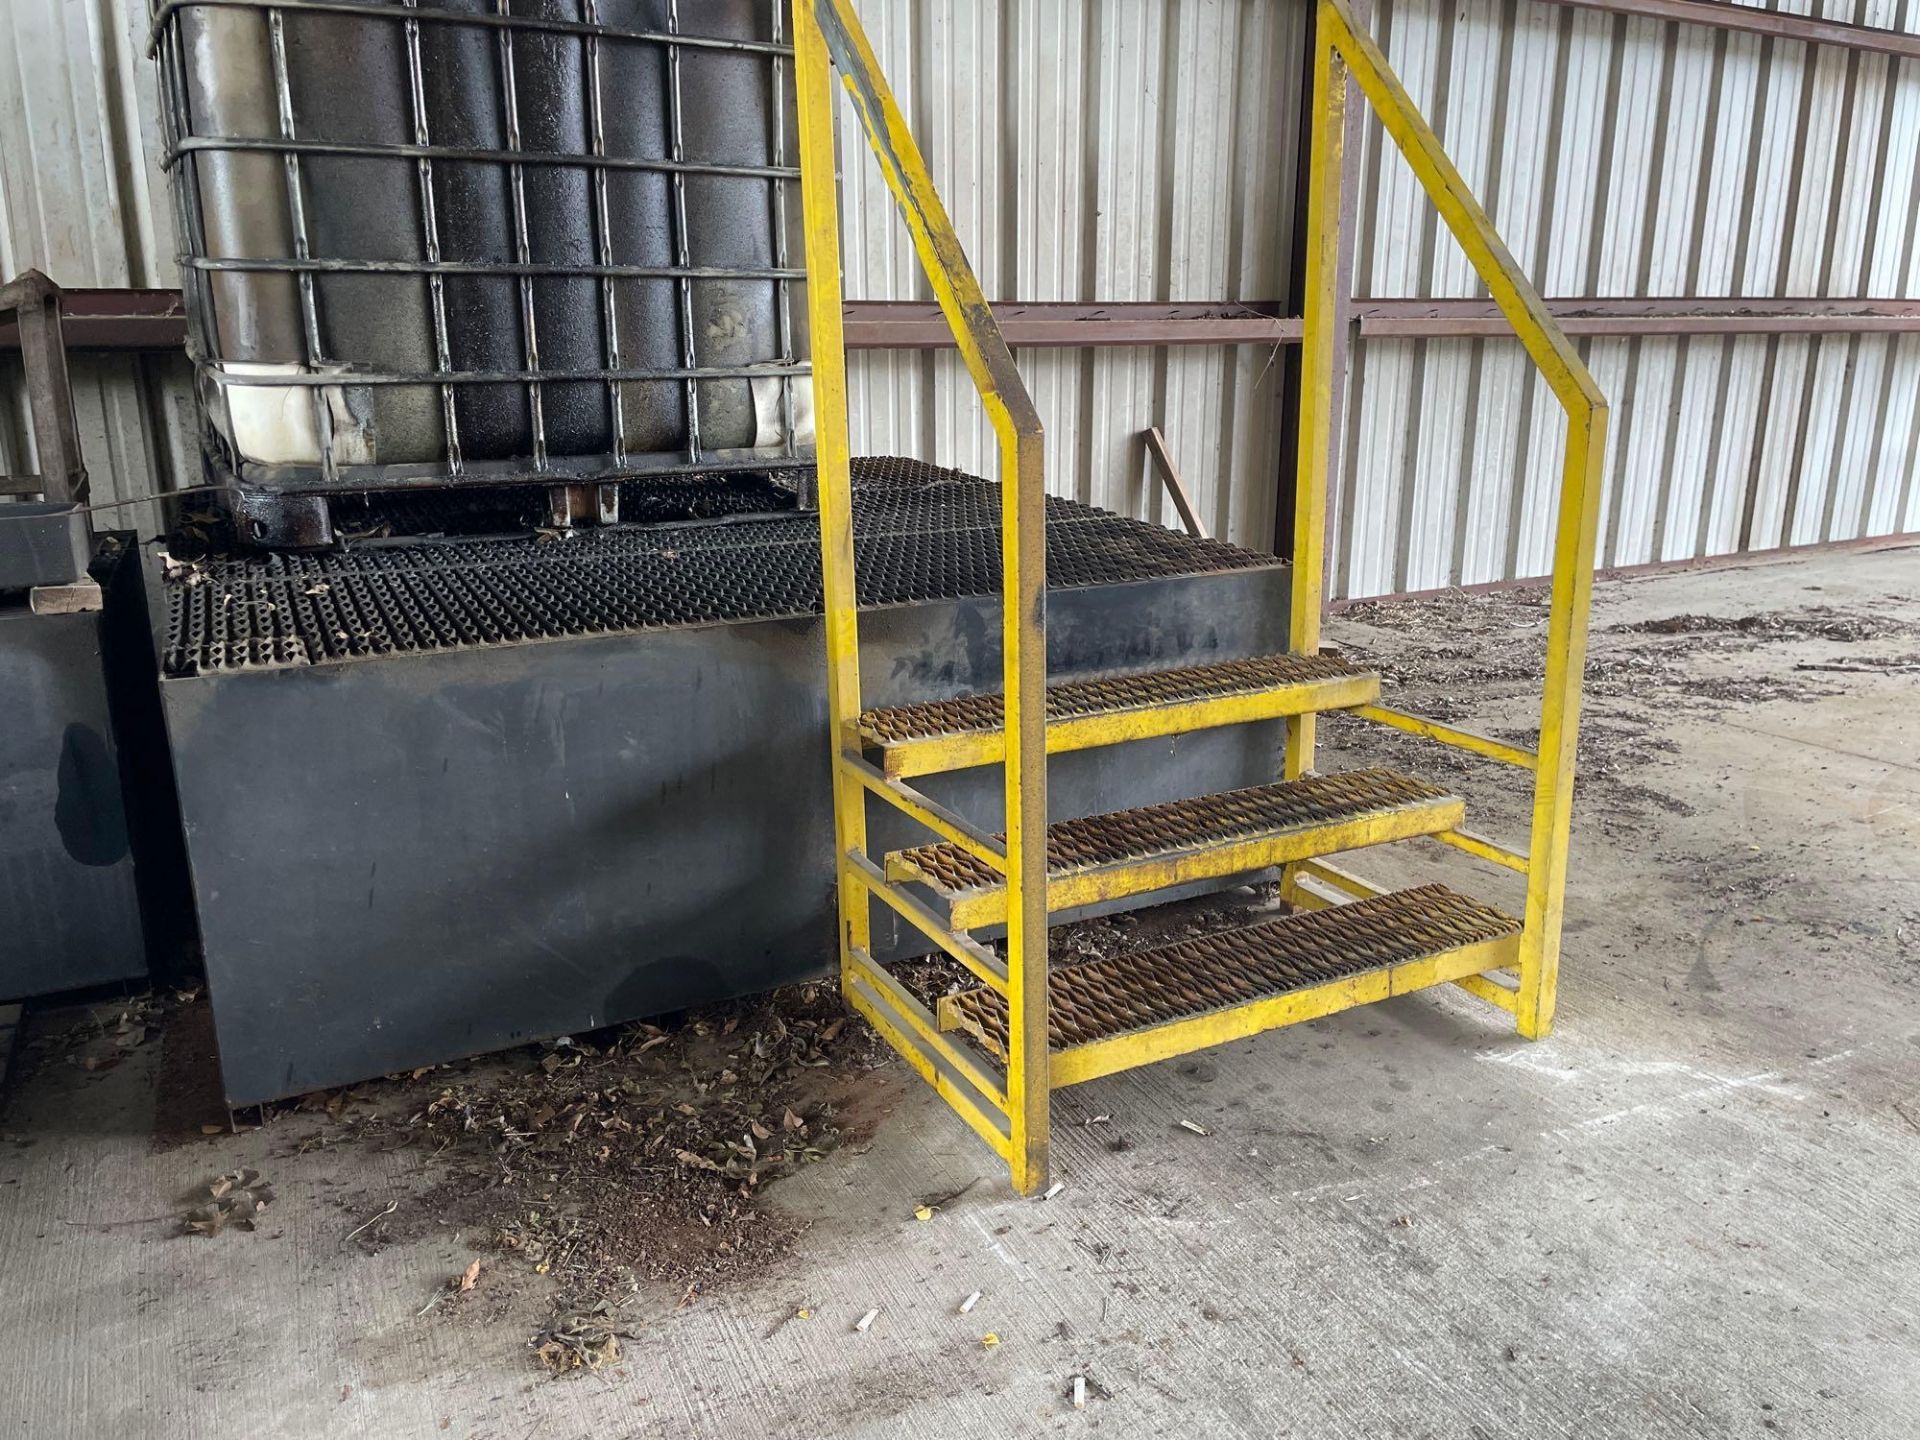 Oil Storage container with yellow rails and stairs 72” X 72” X 26”